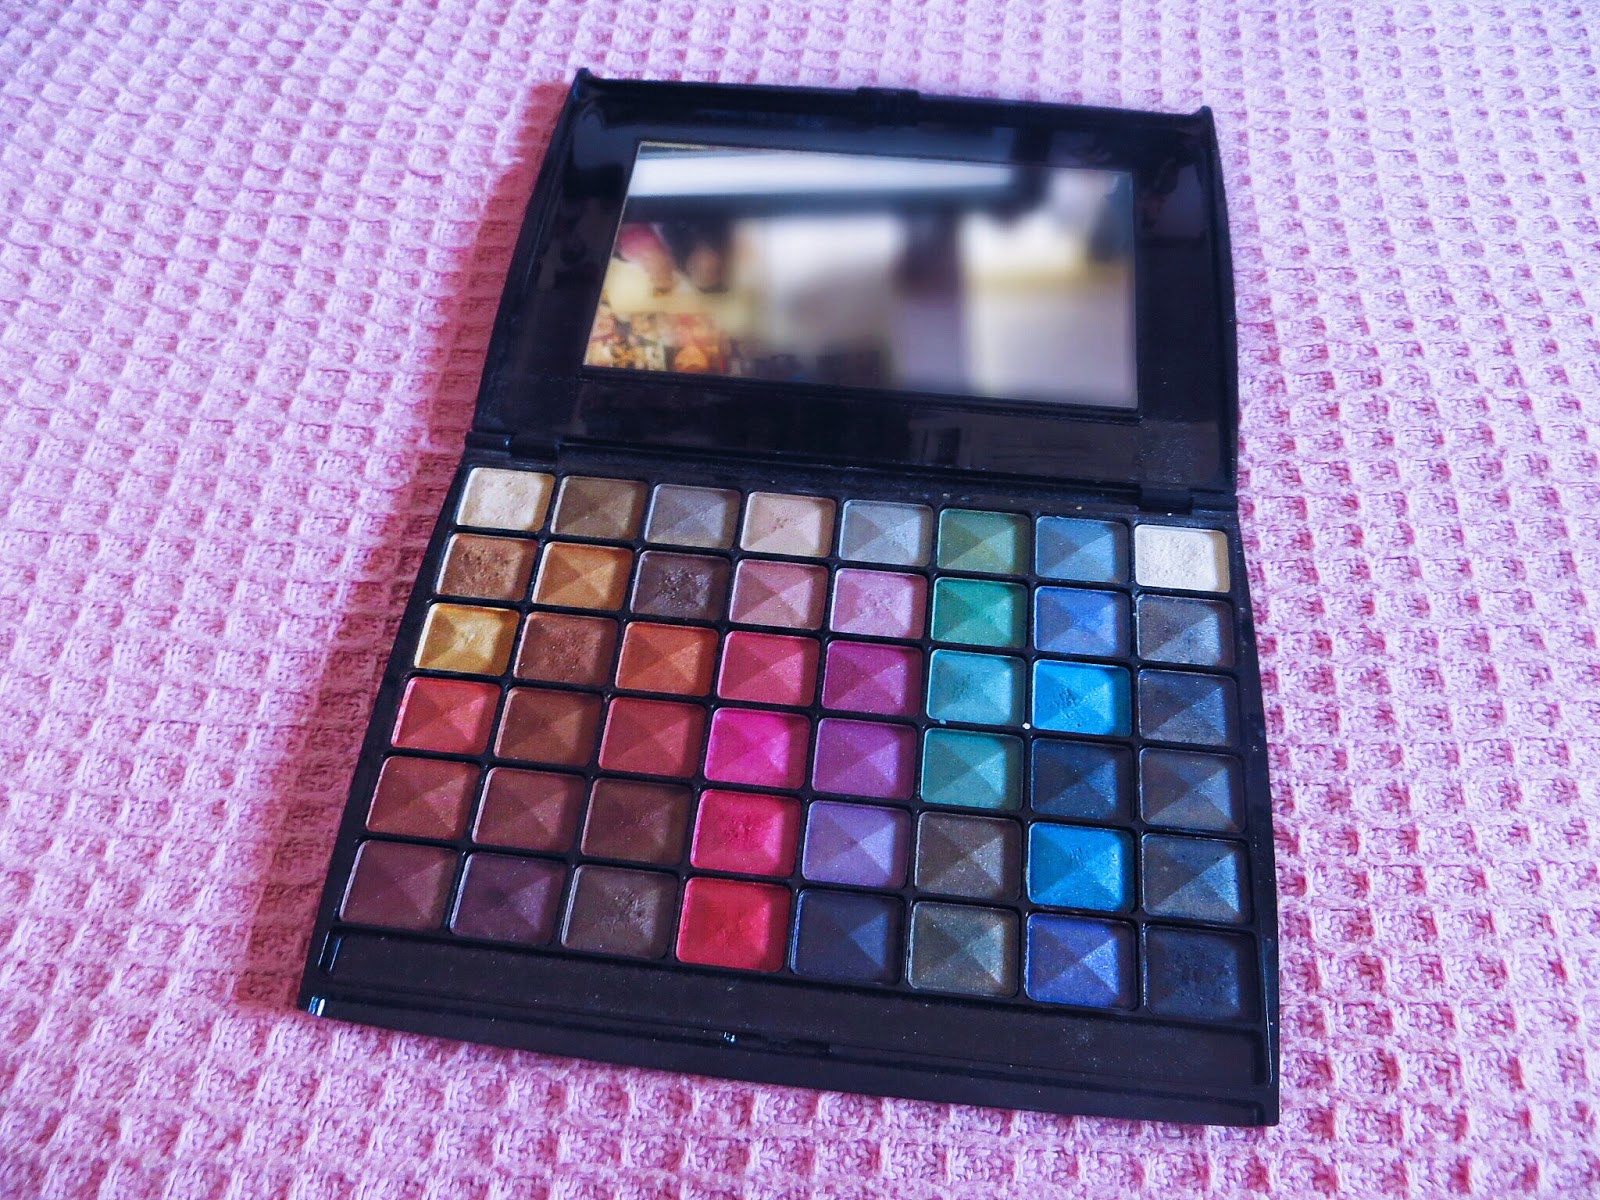 Beauty And Lifestyle The Perfect Palette Tag My Go To Palettes Images, Photos, Reviews